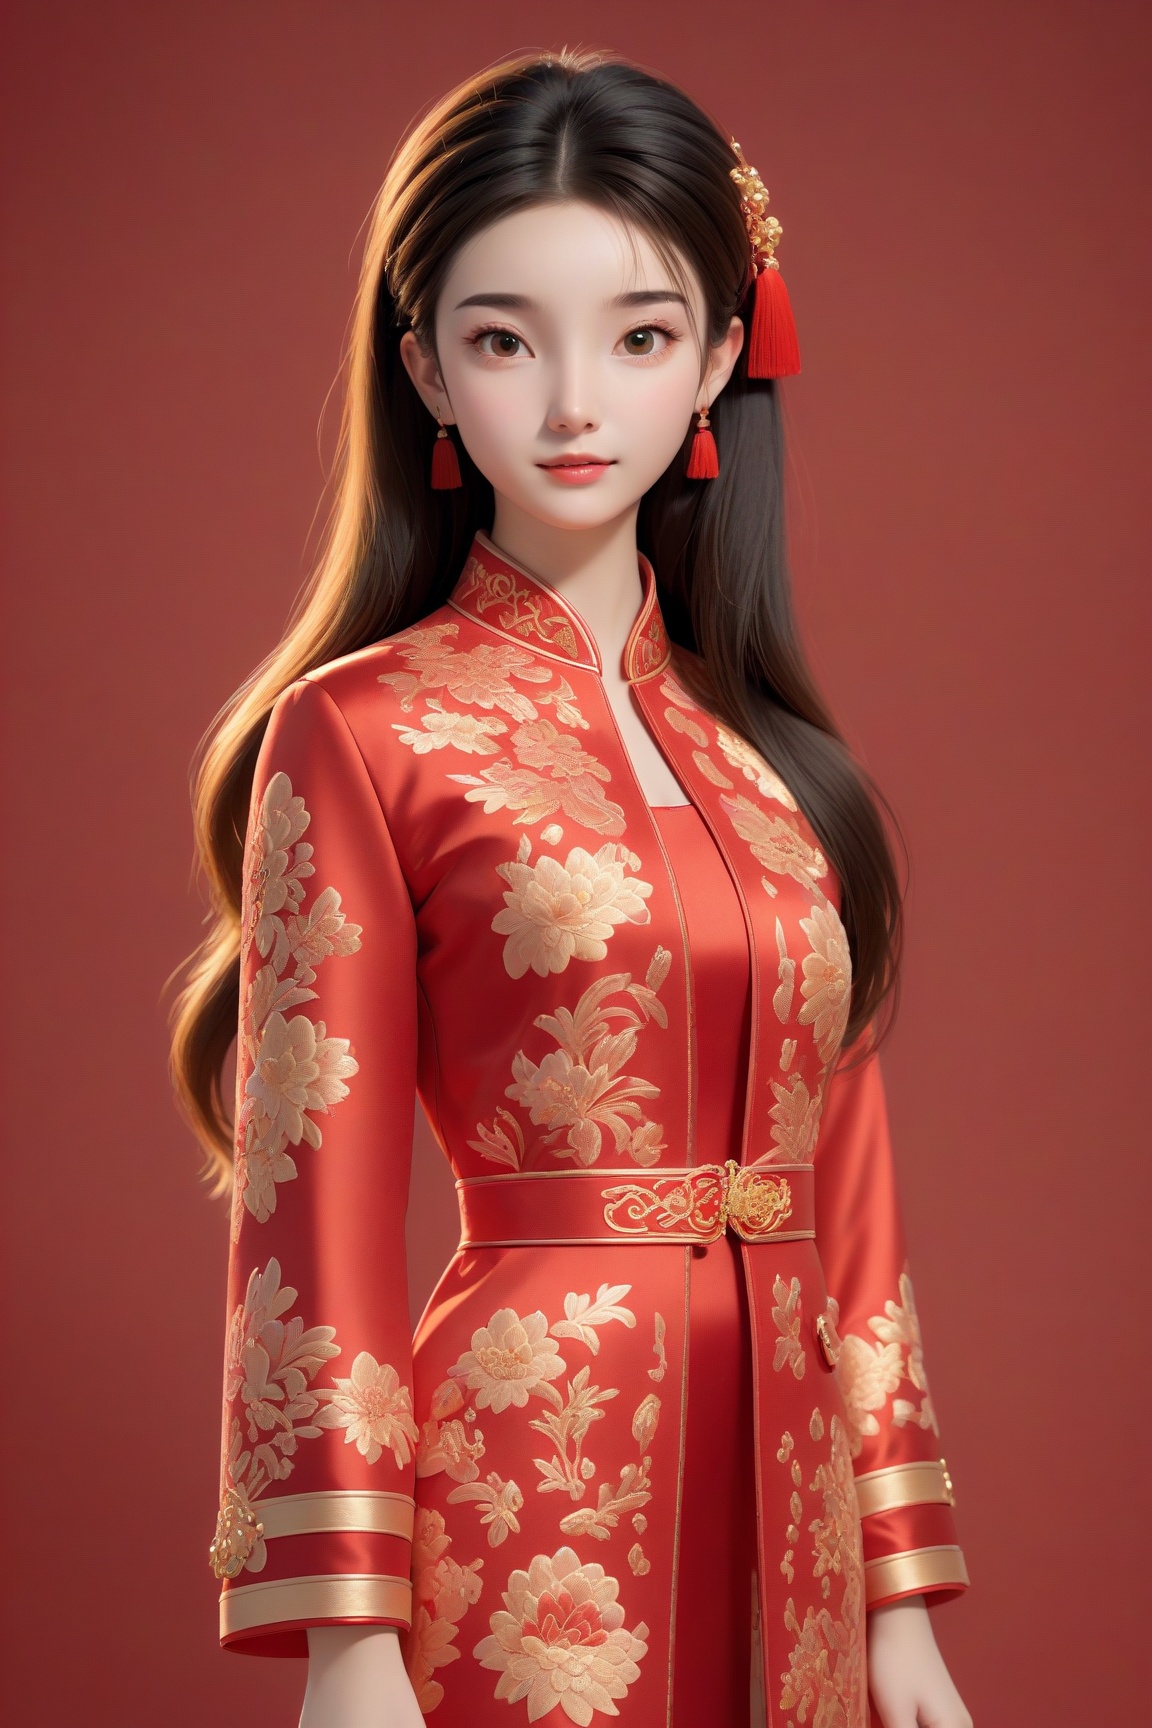  professional 3d model Girl,realistic 3d cartoon style rendering,18 years old,(whole body :1.5),wearing New Year red Chinese Tang suit,fashionable clothing,New Year background,interactive film style,edge lighting,soft gradient,charming illustration,3d rendering,OC rendering,best quality,8K,Super detail, . octane render, highly detailed, volumetric, dramatic lighting